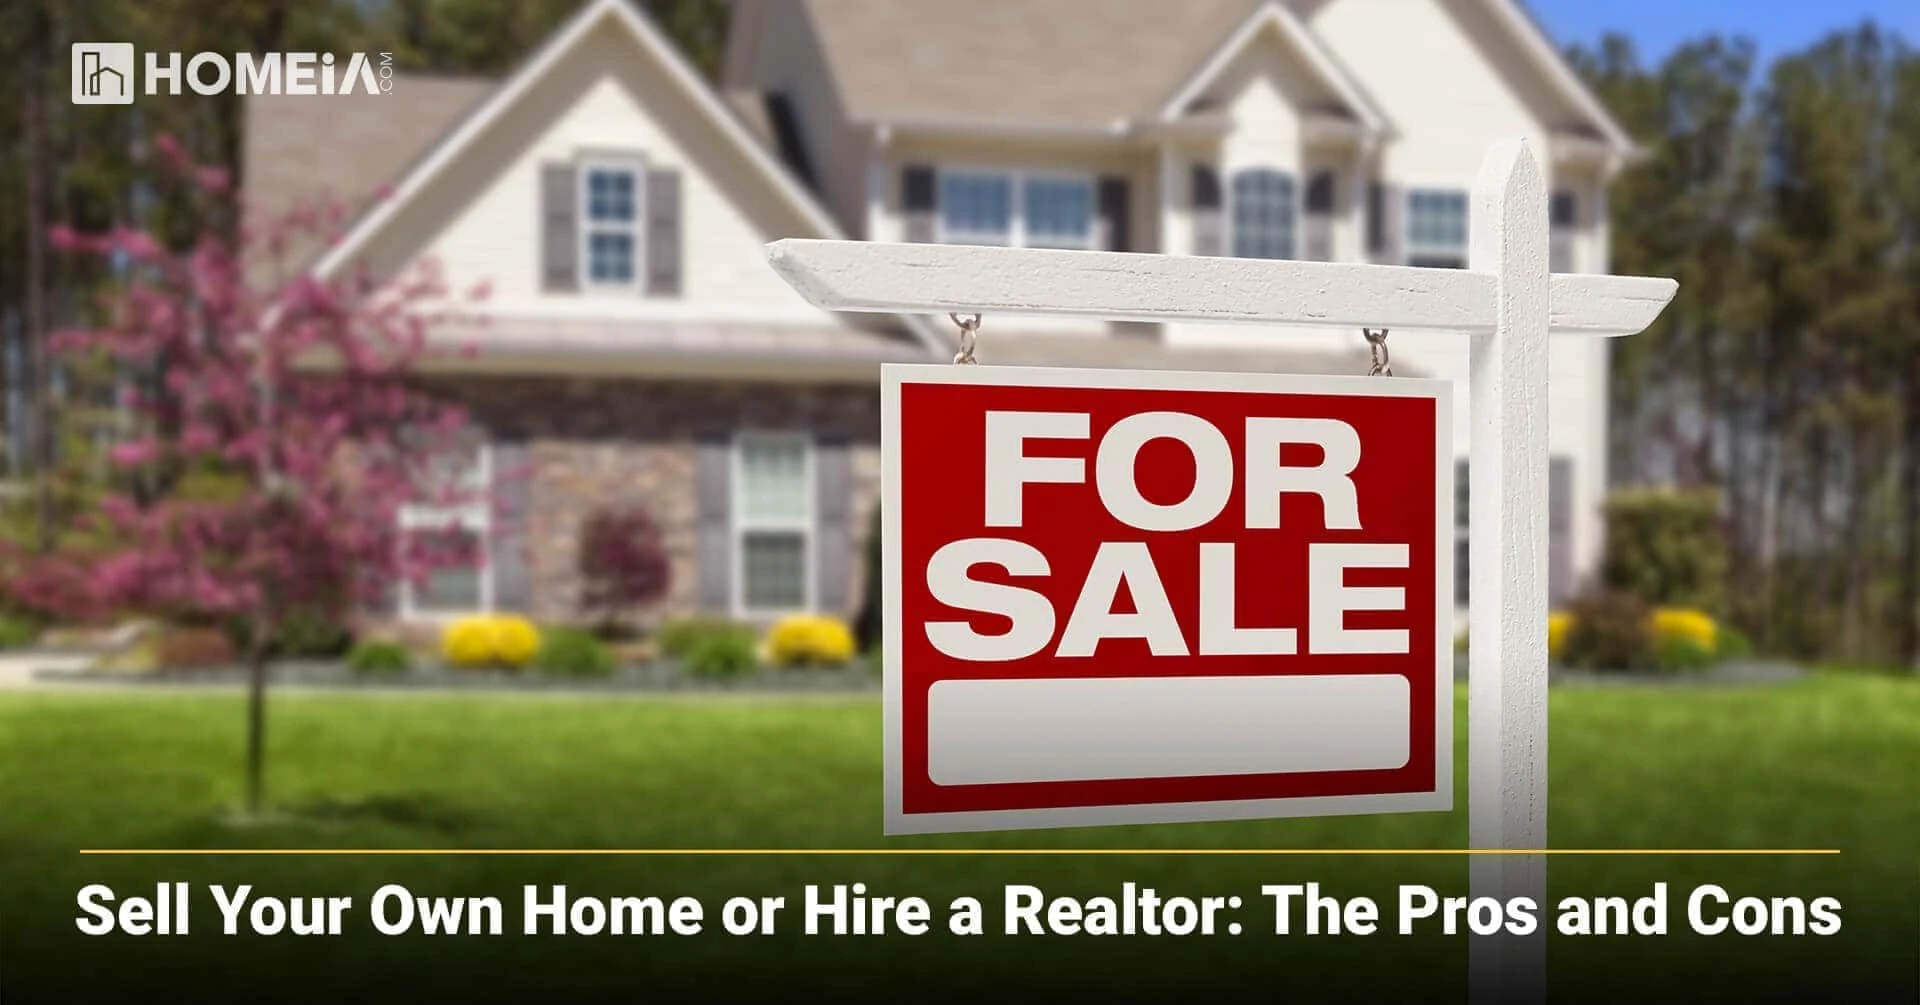 Sell Your Own Home or Hire a Realtor: The Pros and Cons